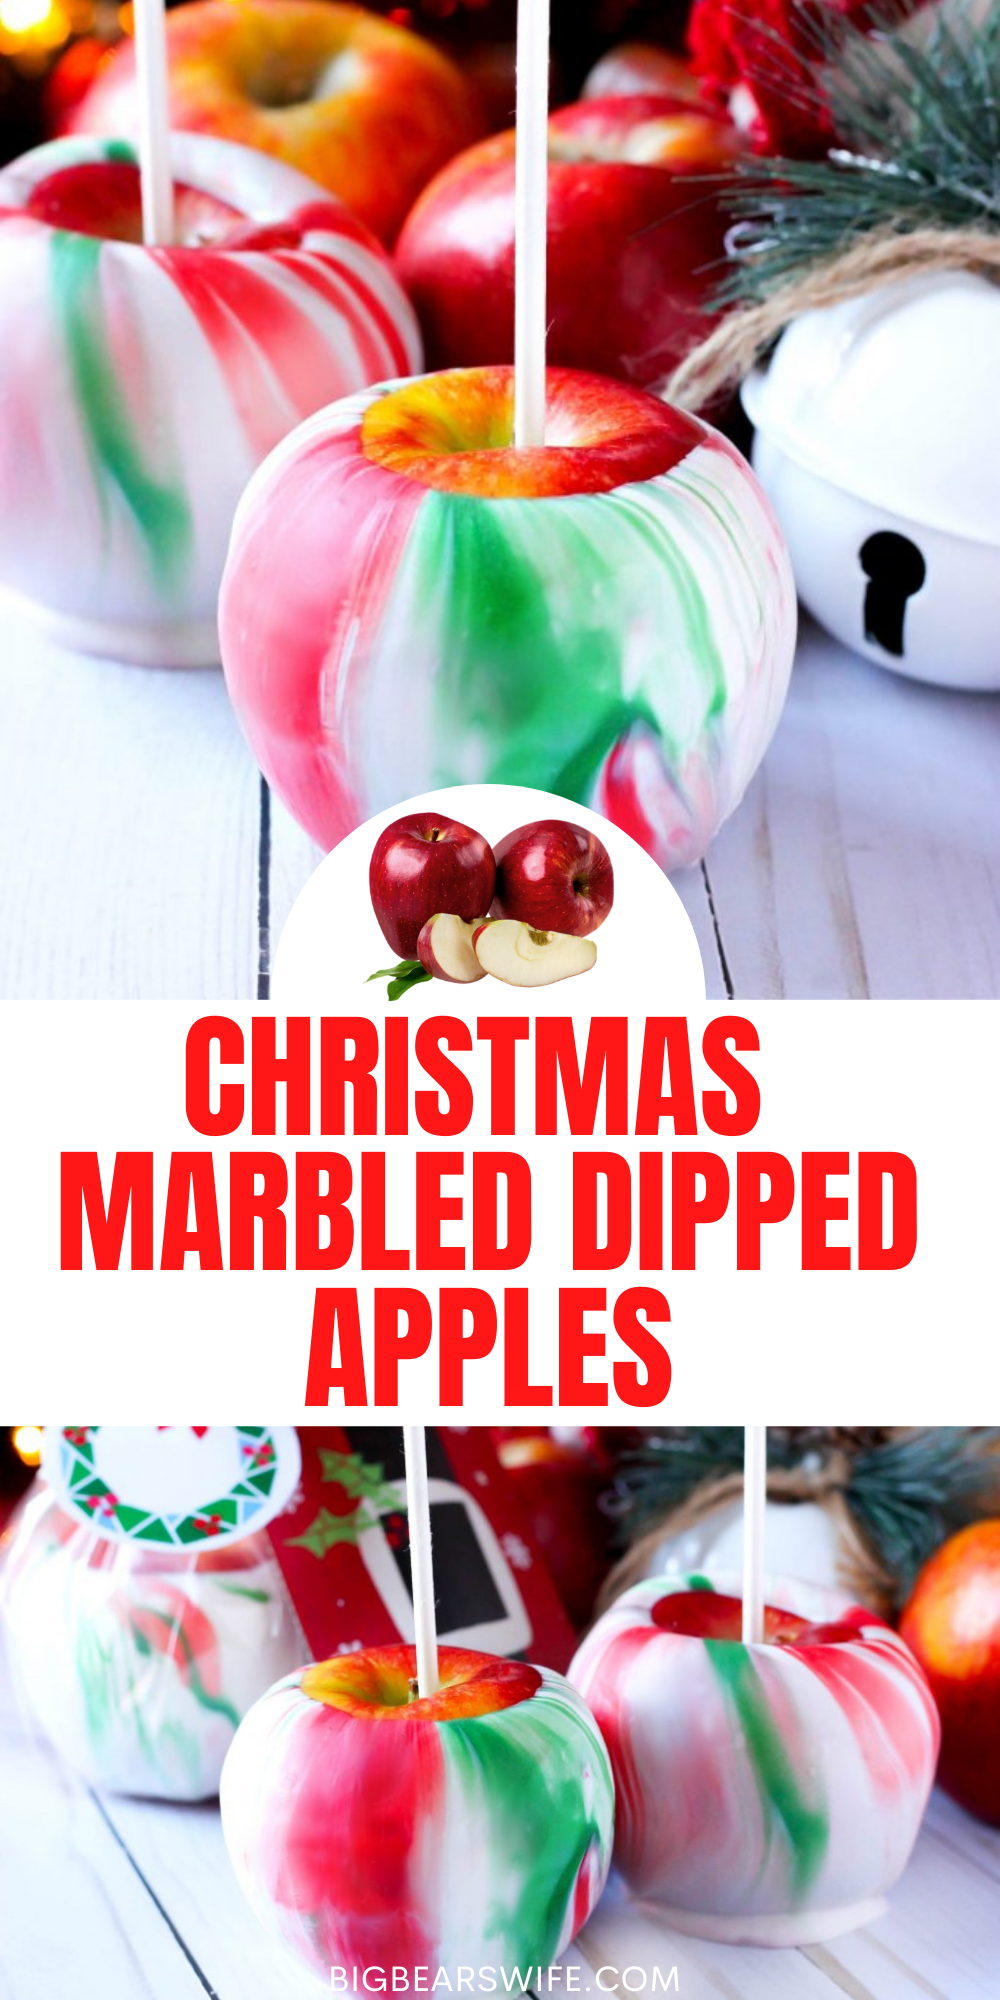 Christmas Marbled Dipped Apples - Want to spruce up a gift card as a gift? Want to make Christmas themed treats for your party? These Christmas Marbled Dipped Apples are the answer!! via @bigbearswife